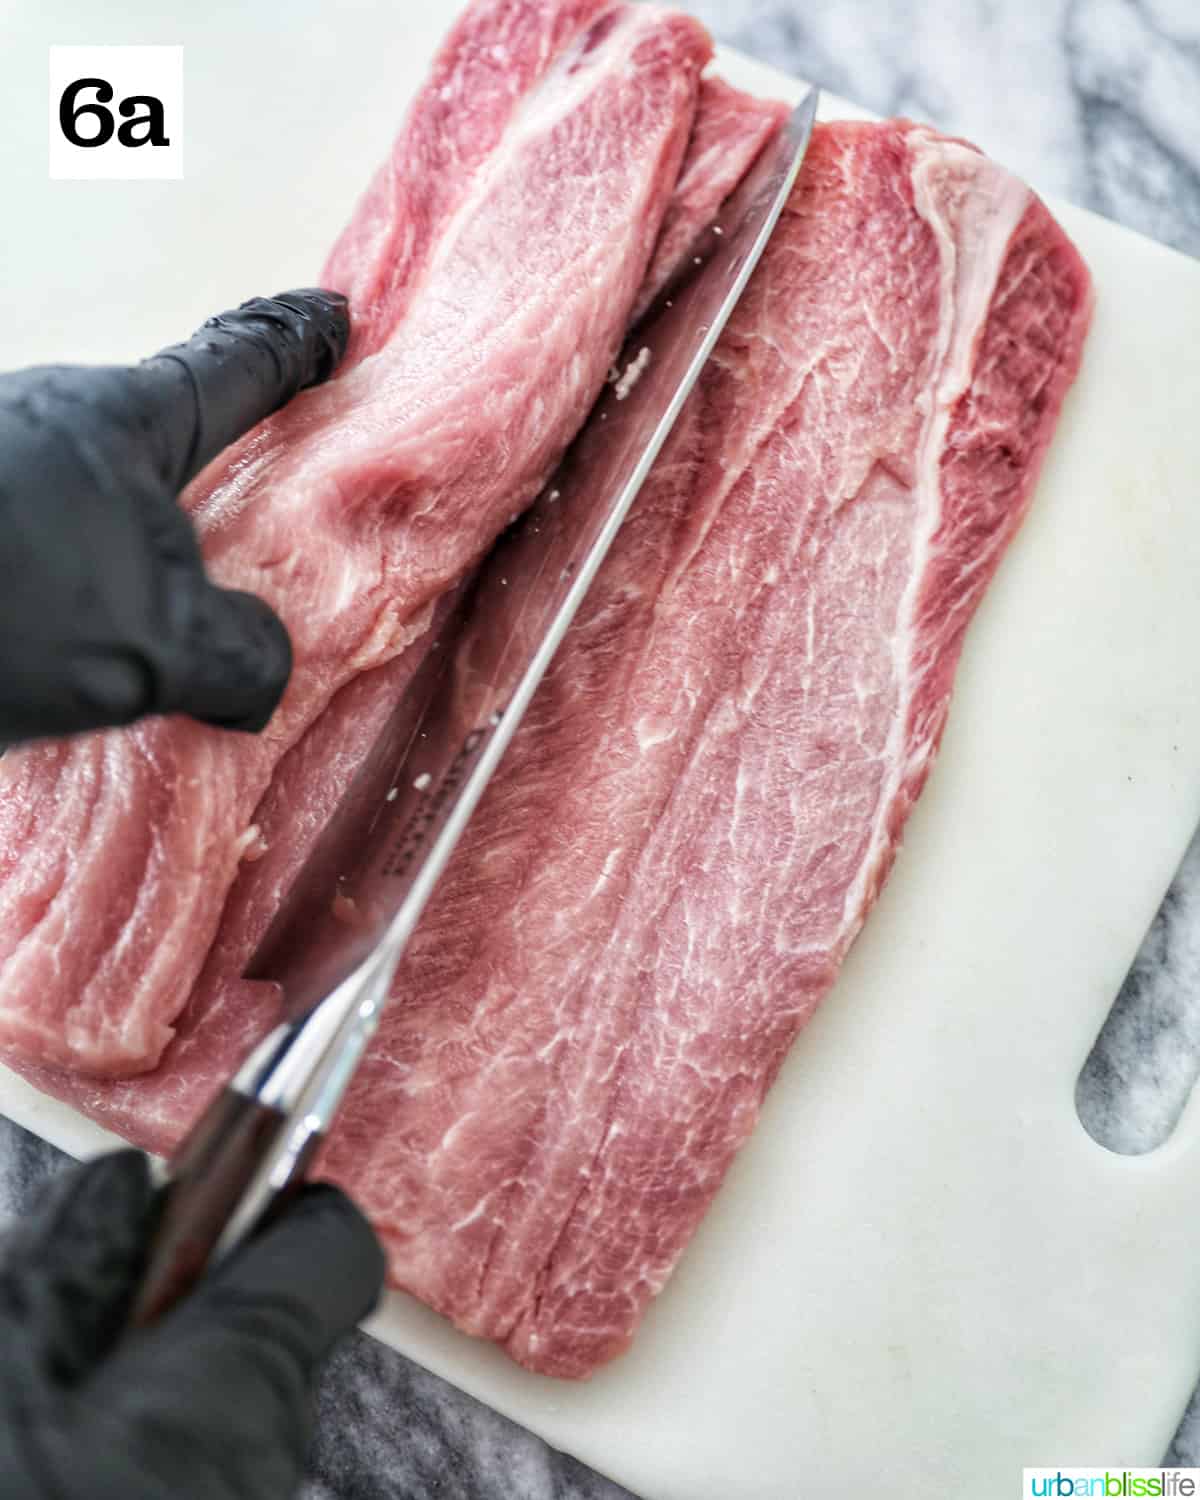 gloved hands slicing into the pork loin with a knife on a white cutting board.